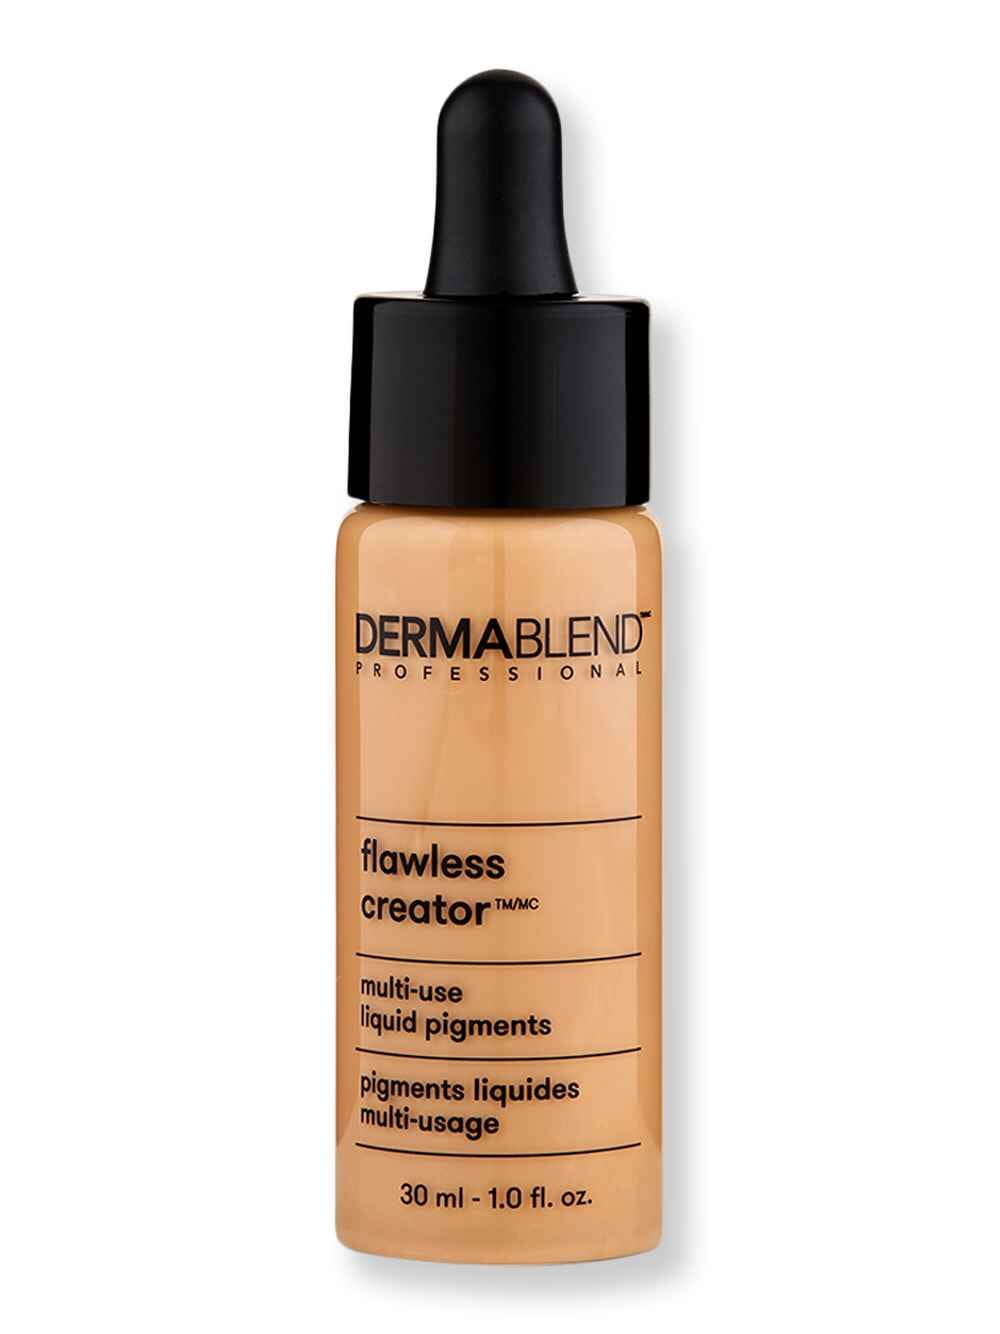 Dermablend Dermablend Flawless Creator Foundation 43W Tinted Moisturizers & Foundations 